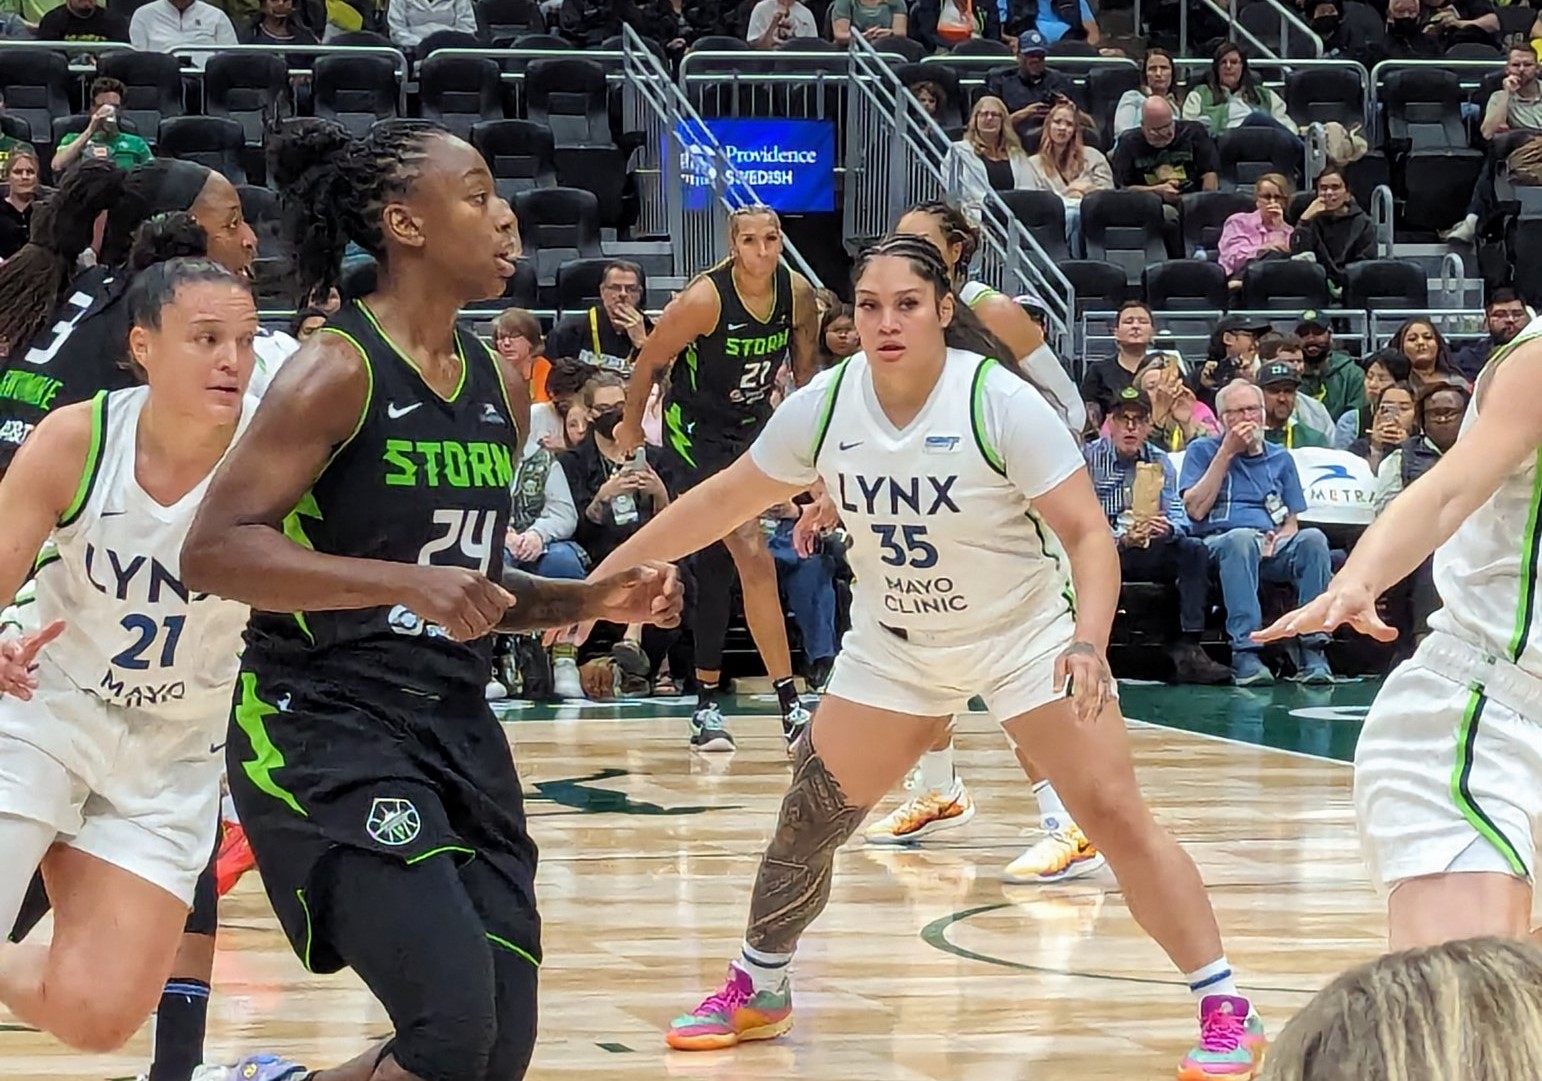 Anchorage’s Alissa Pili officially laces ‘em up in WNBA, plays 10 minutes in pro debut